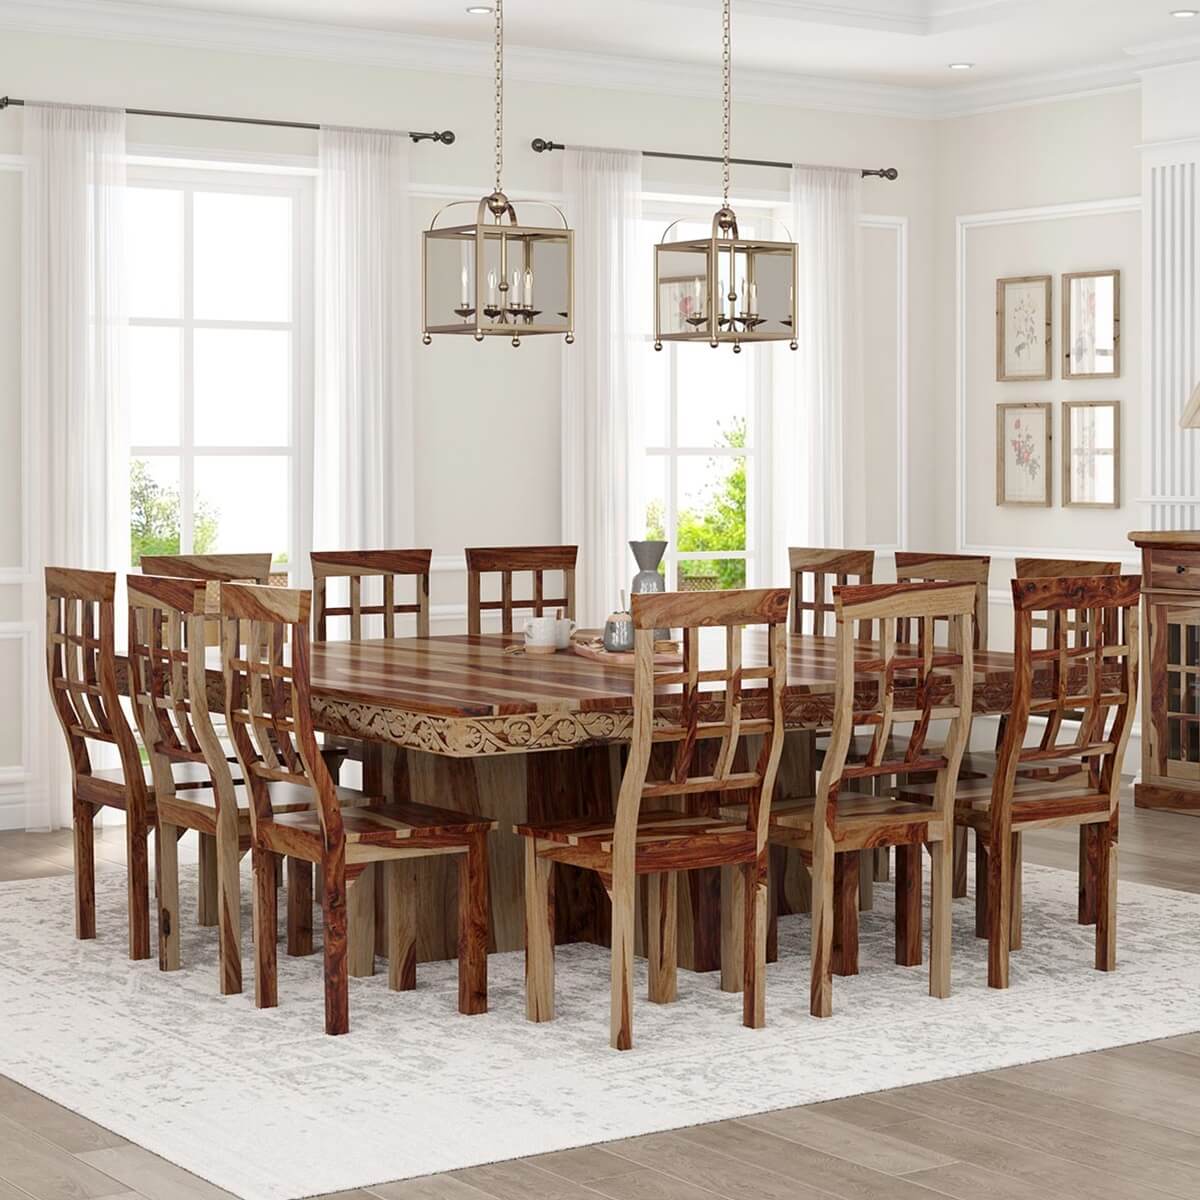 https://www.sierralivingconcepts.com/images/thumbs/0391659_dallas-ranch-solid-wood-square-dining-room-table-set.jpeg